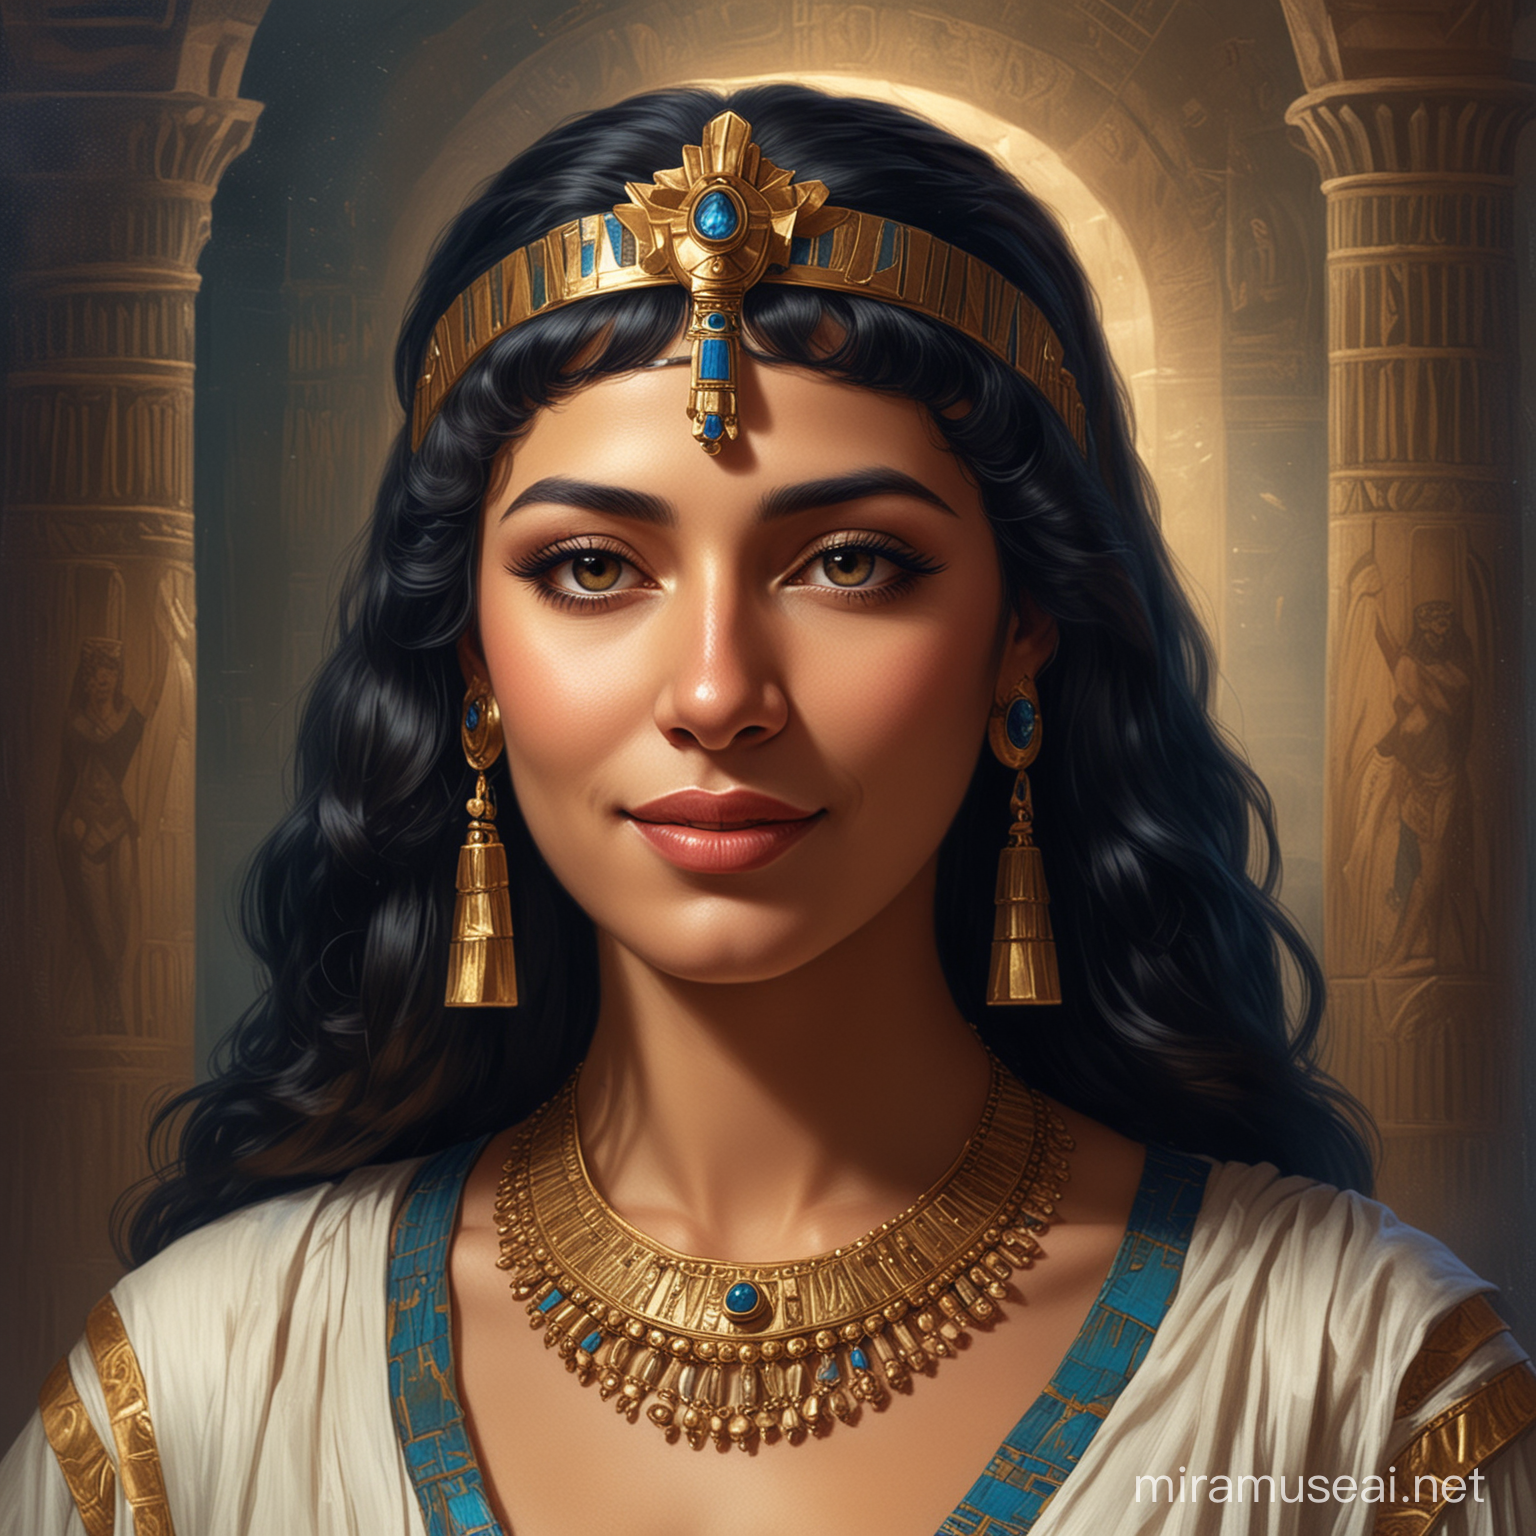 Enigmatic Portrait of Queen Cleopatra with Intriguing Smile